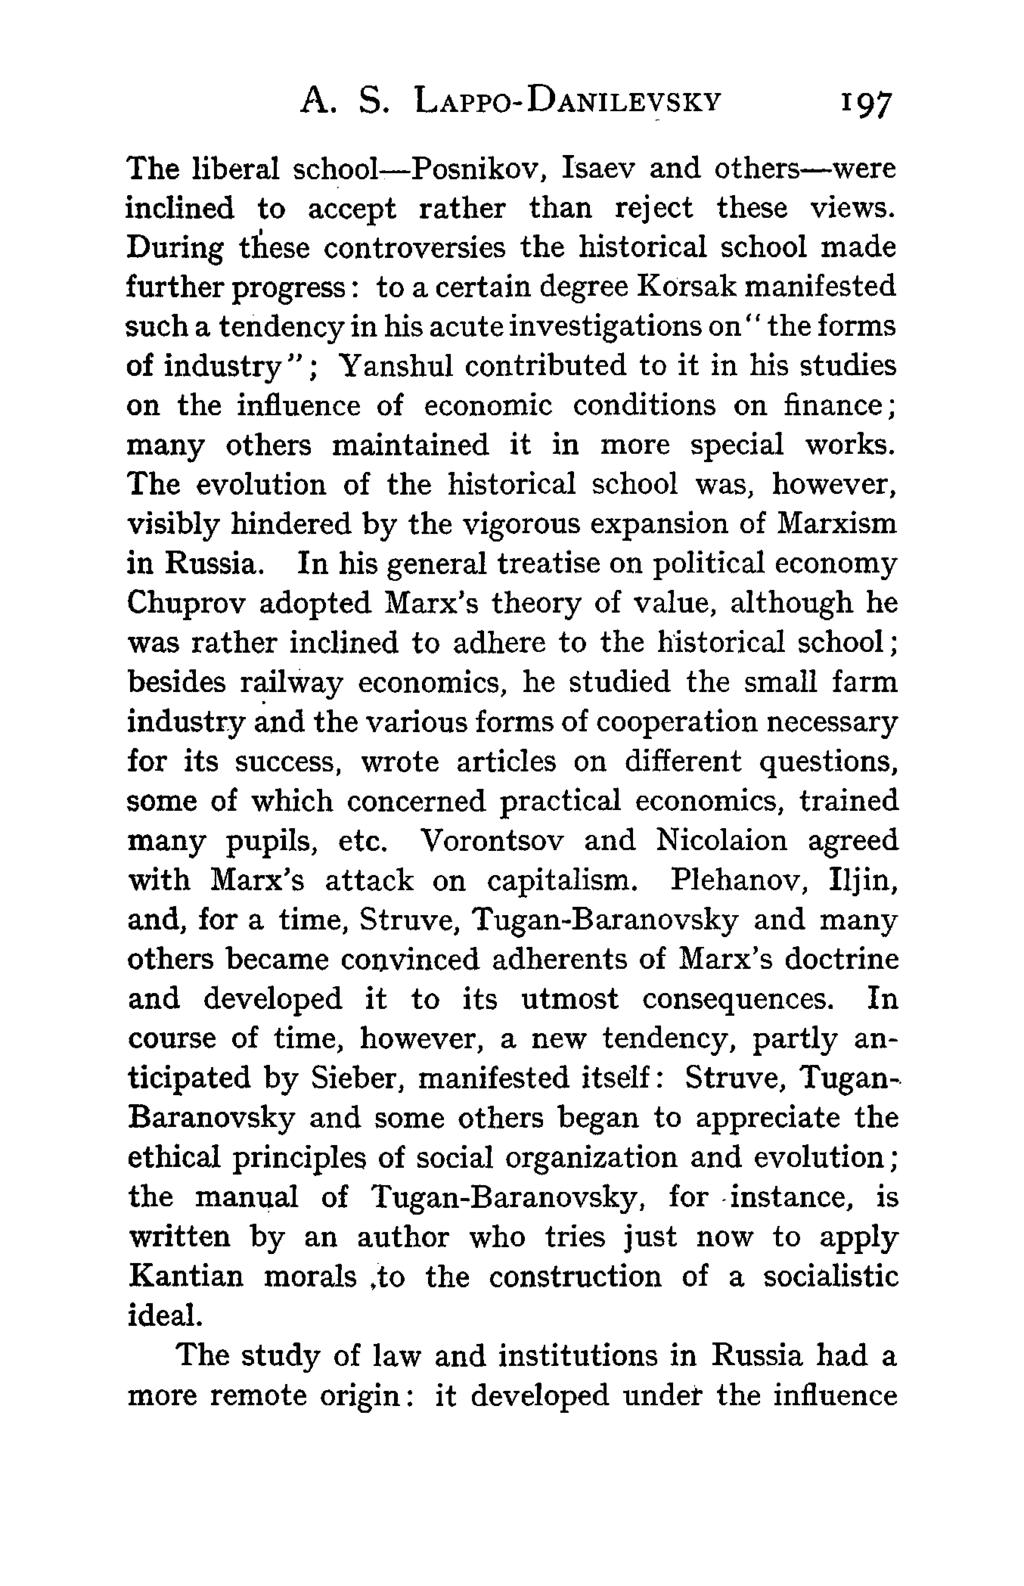 A. S. LAPPO-DANILEVSKY 197 The liberal school Posnikov, Isaev and others were inclined to accept rather than reject these views.